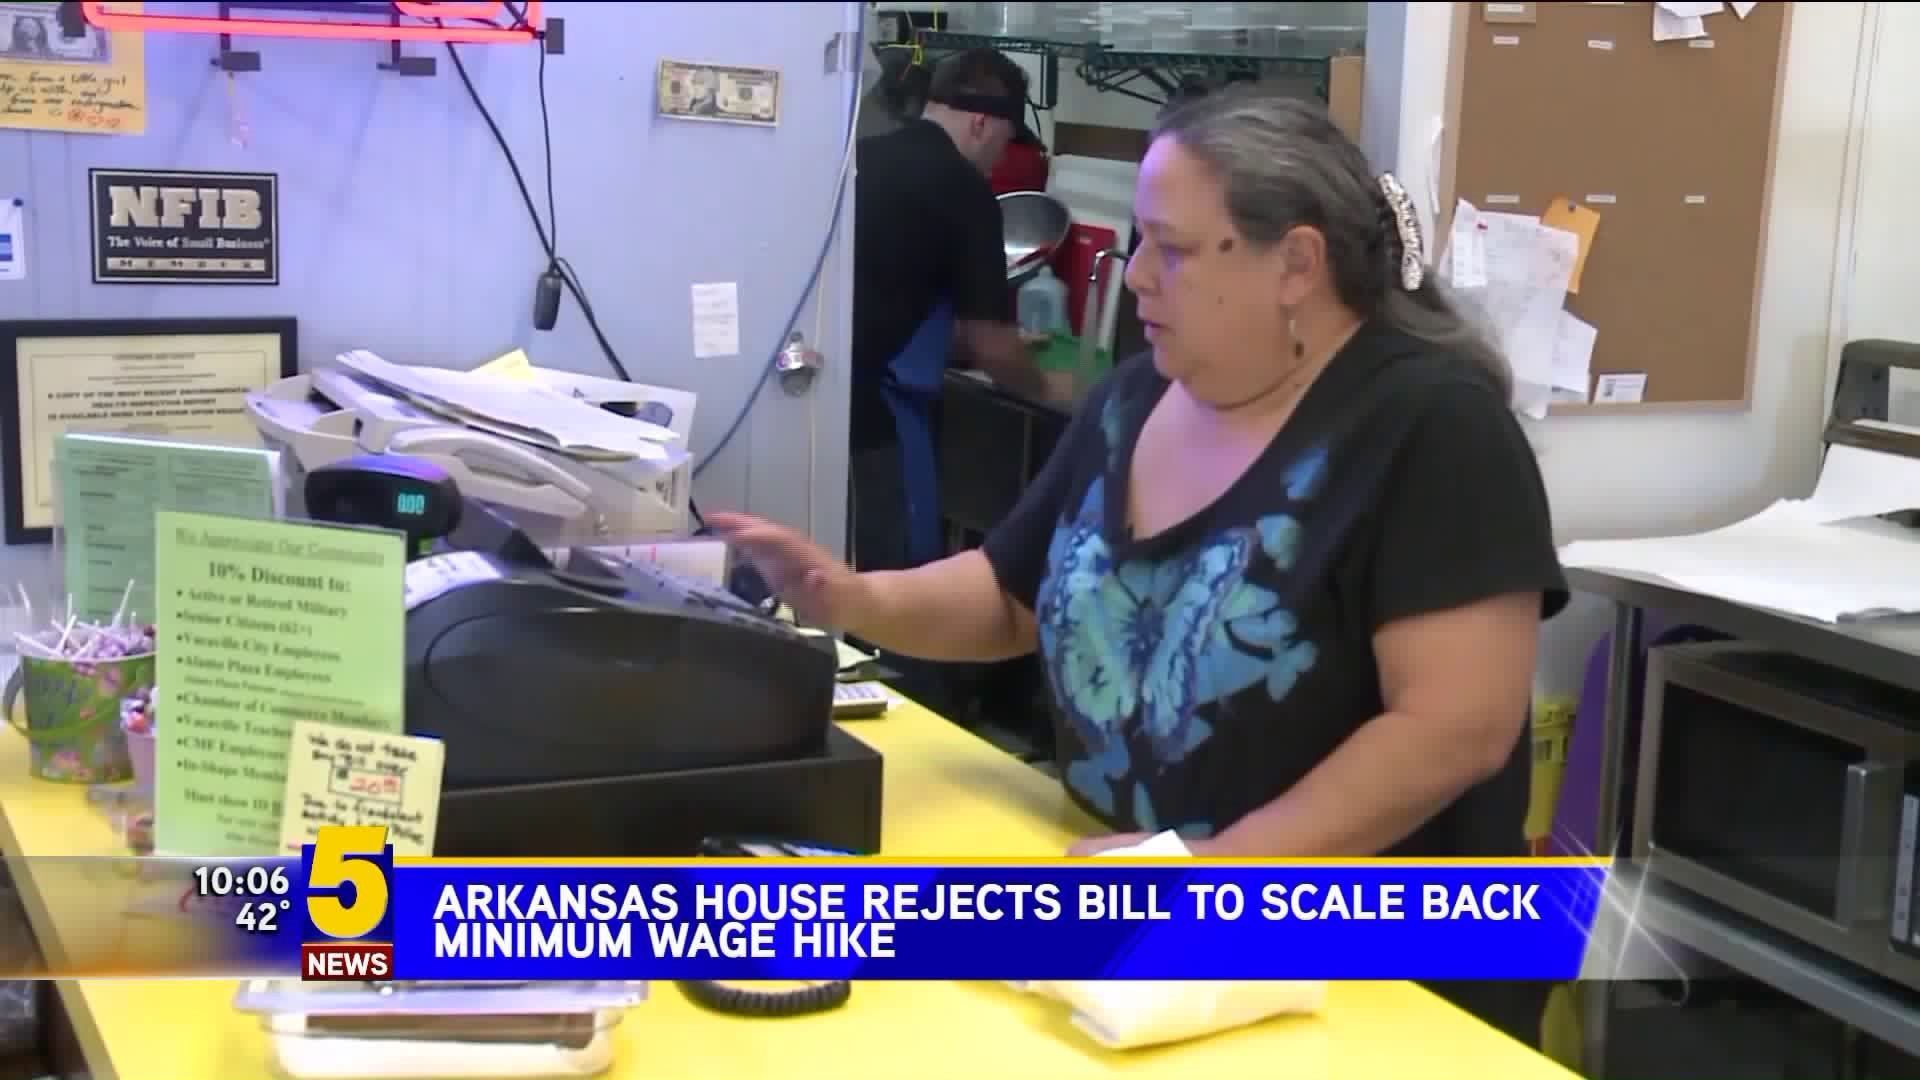 Arkansas House Rejects Bill To Scale Back Minimum Wage Hike